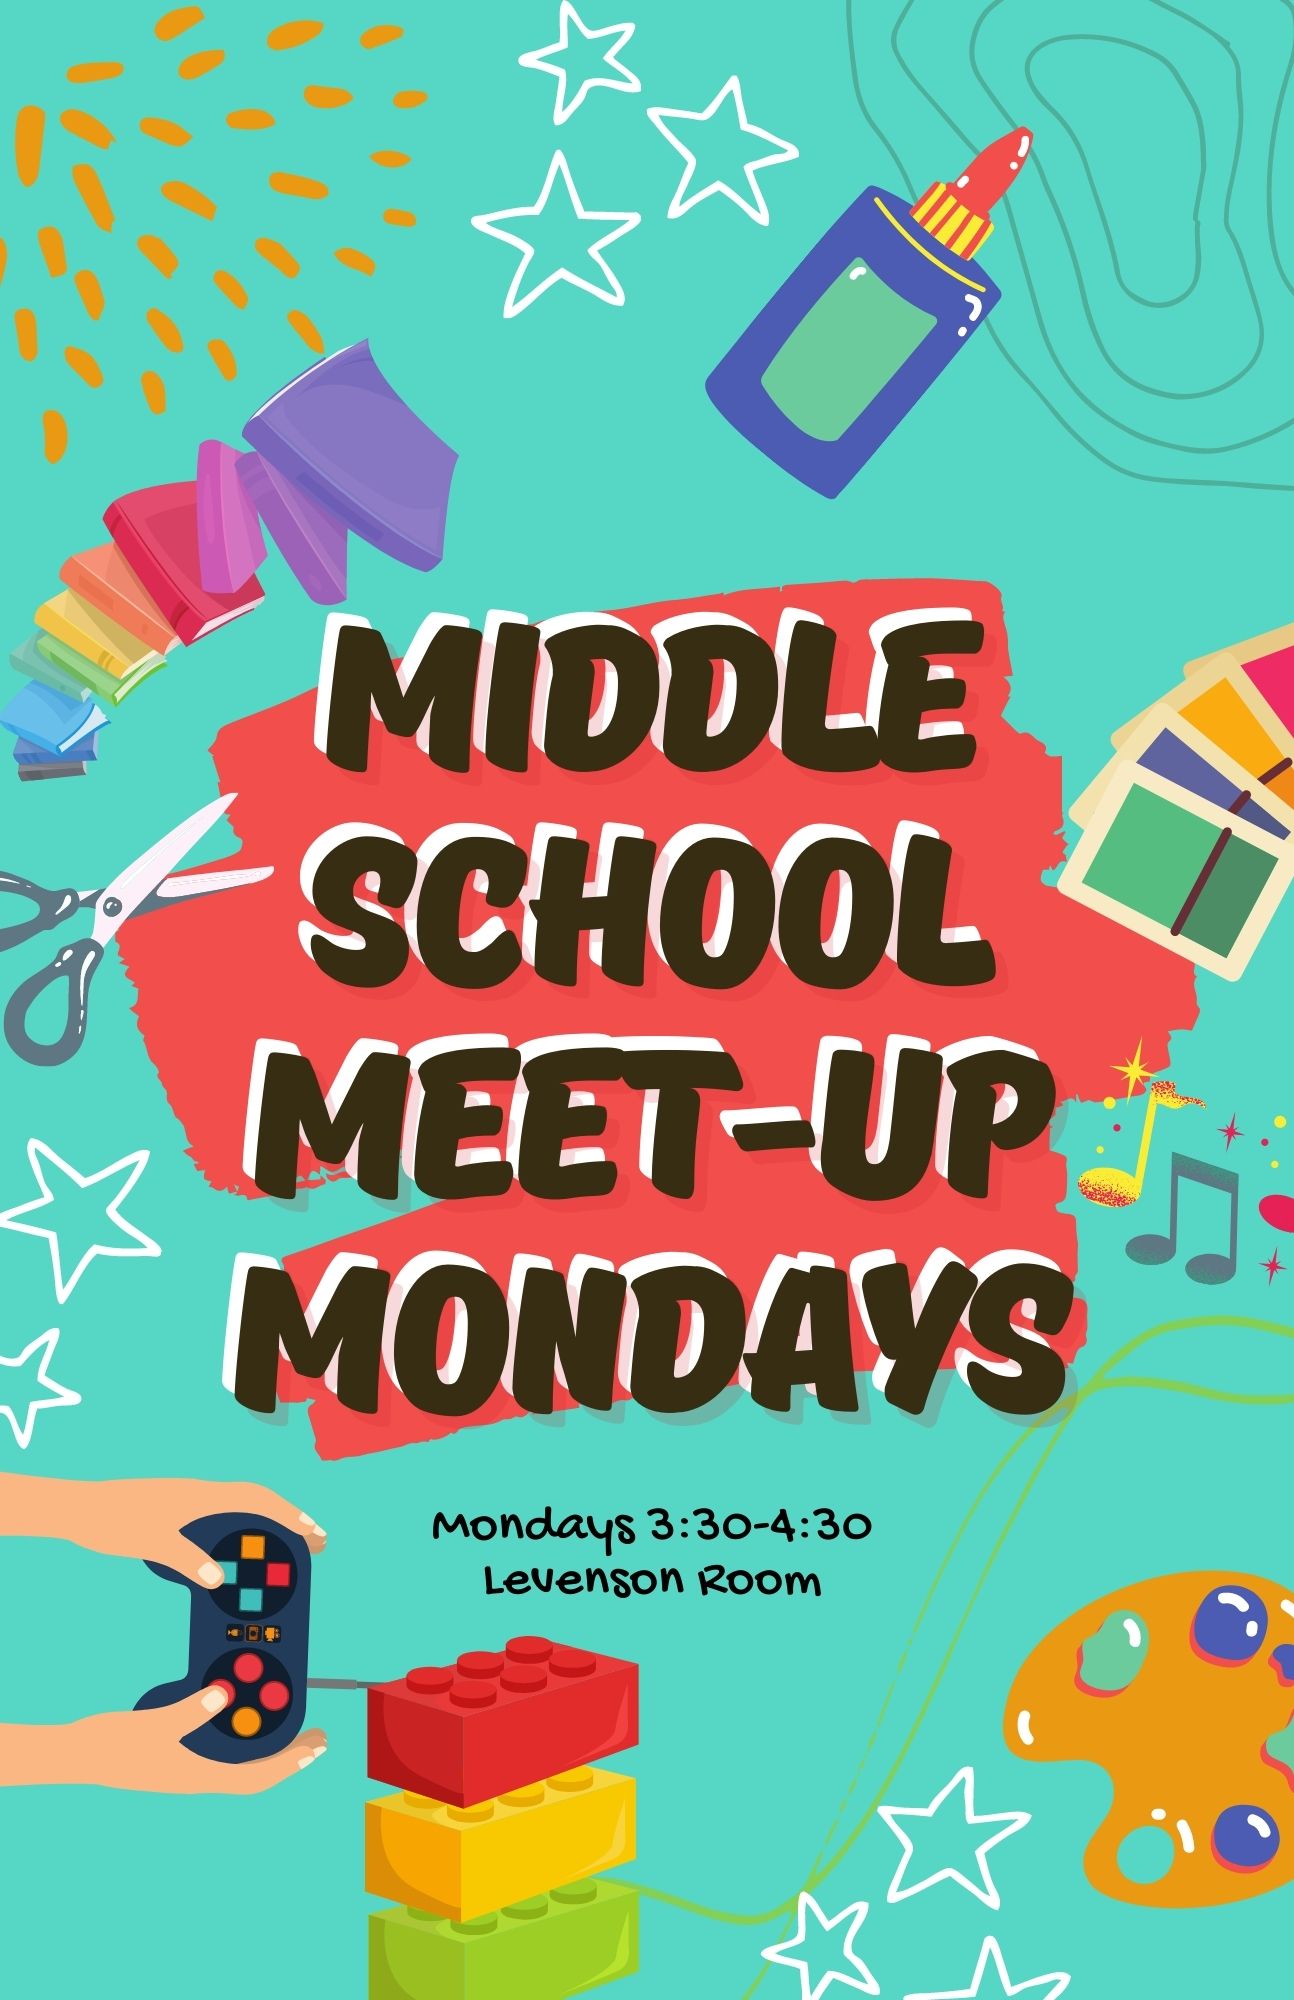 Text reads "Middle School Meet-Up Mondays" with assorted art supply and gaming images